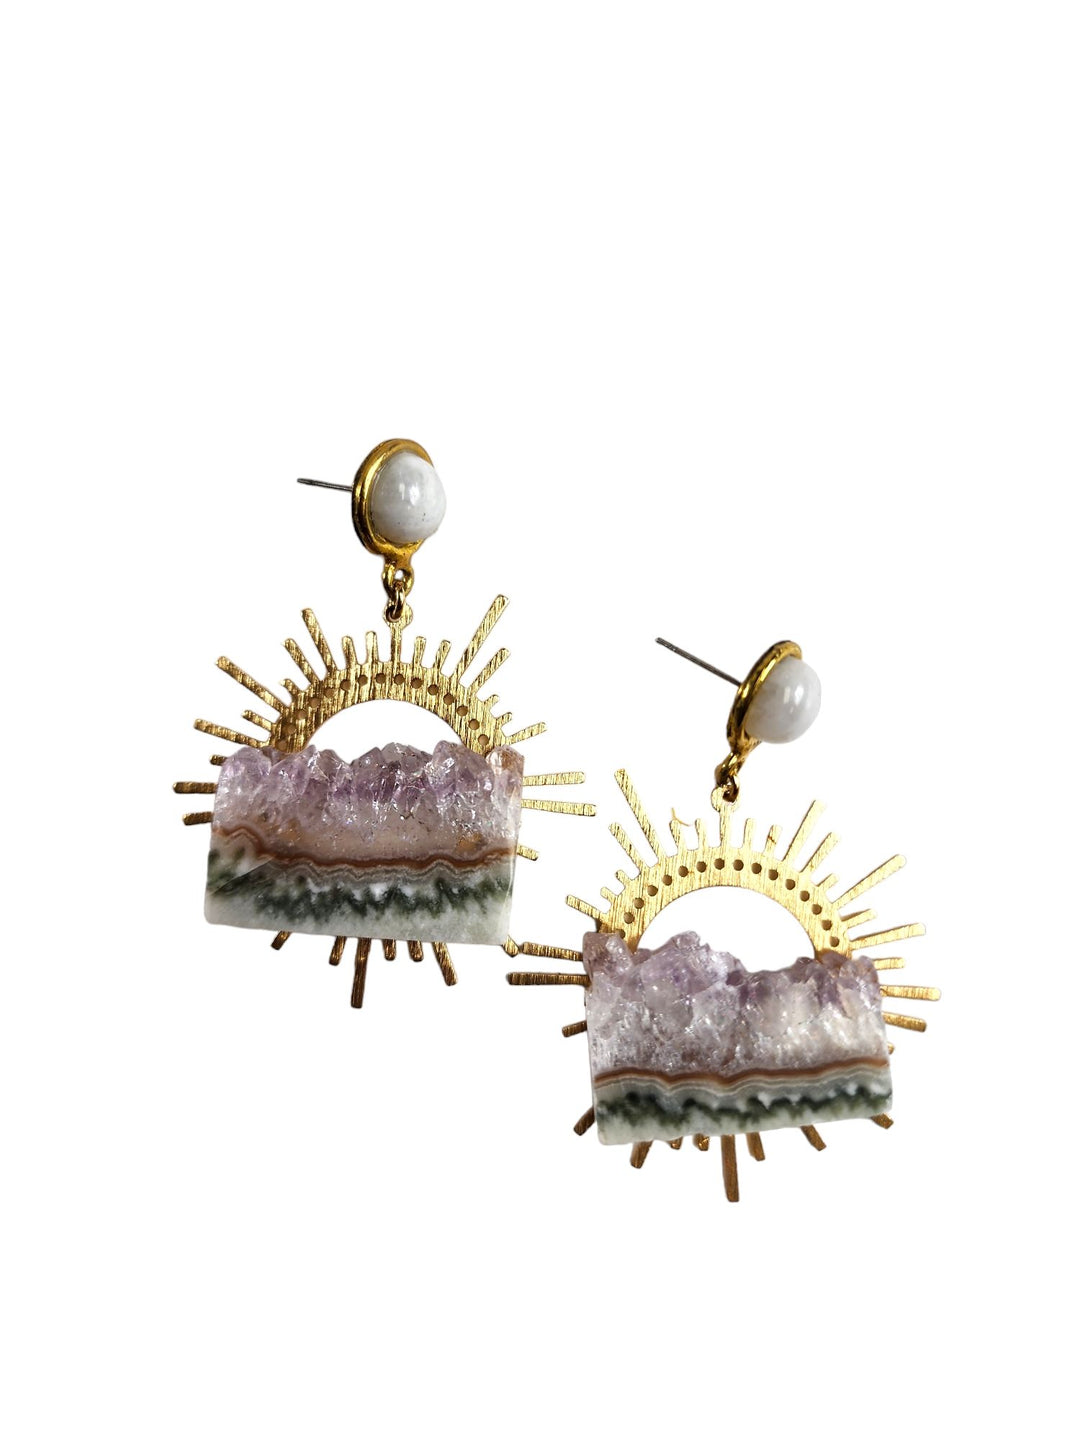 The On The Horizon Amethyst Stalactite Earring Collection